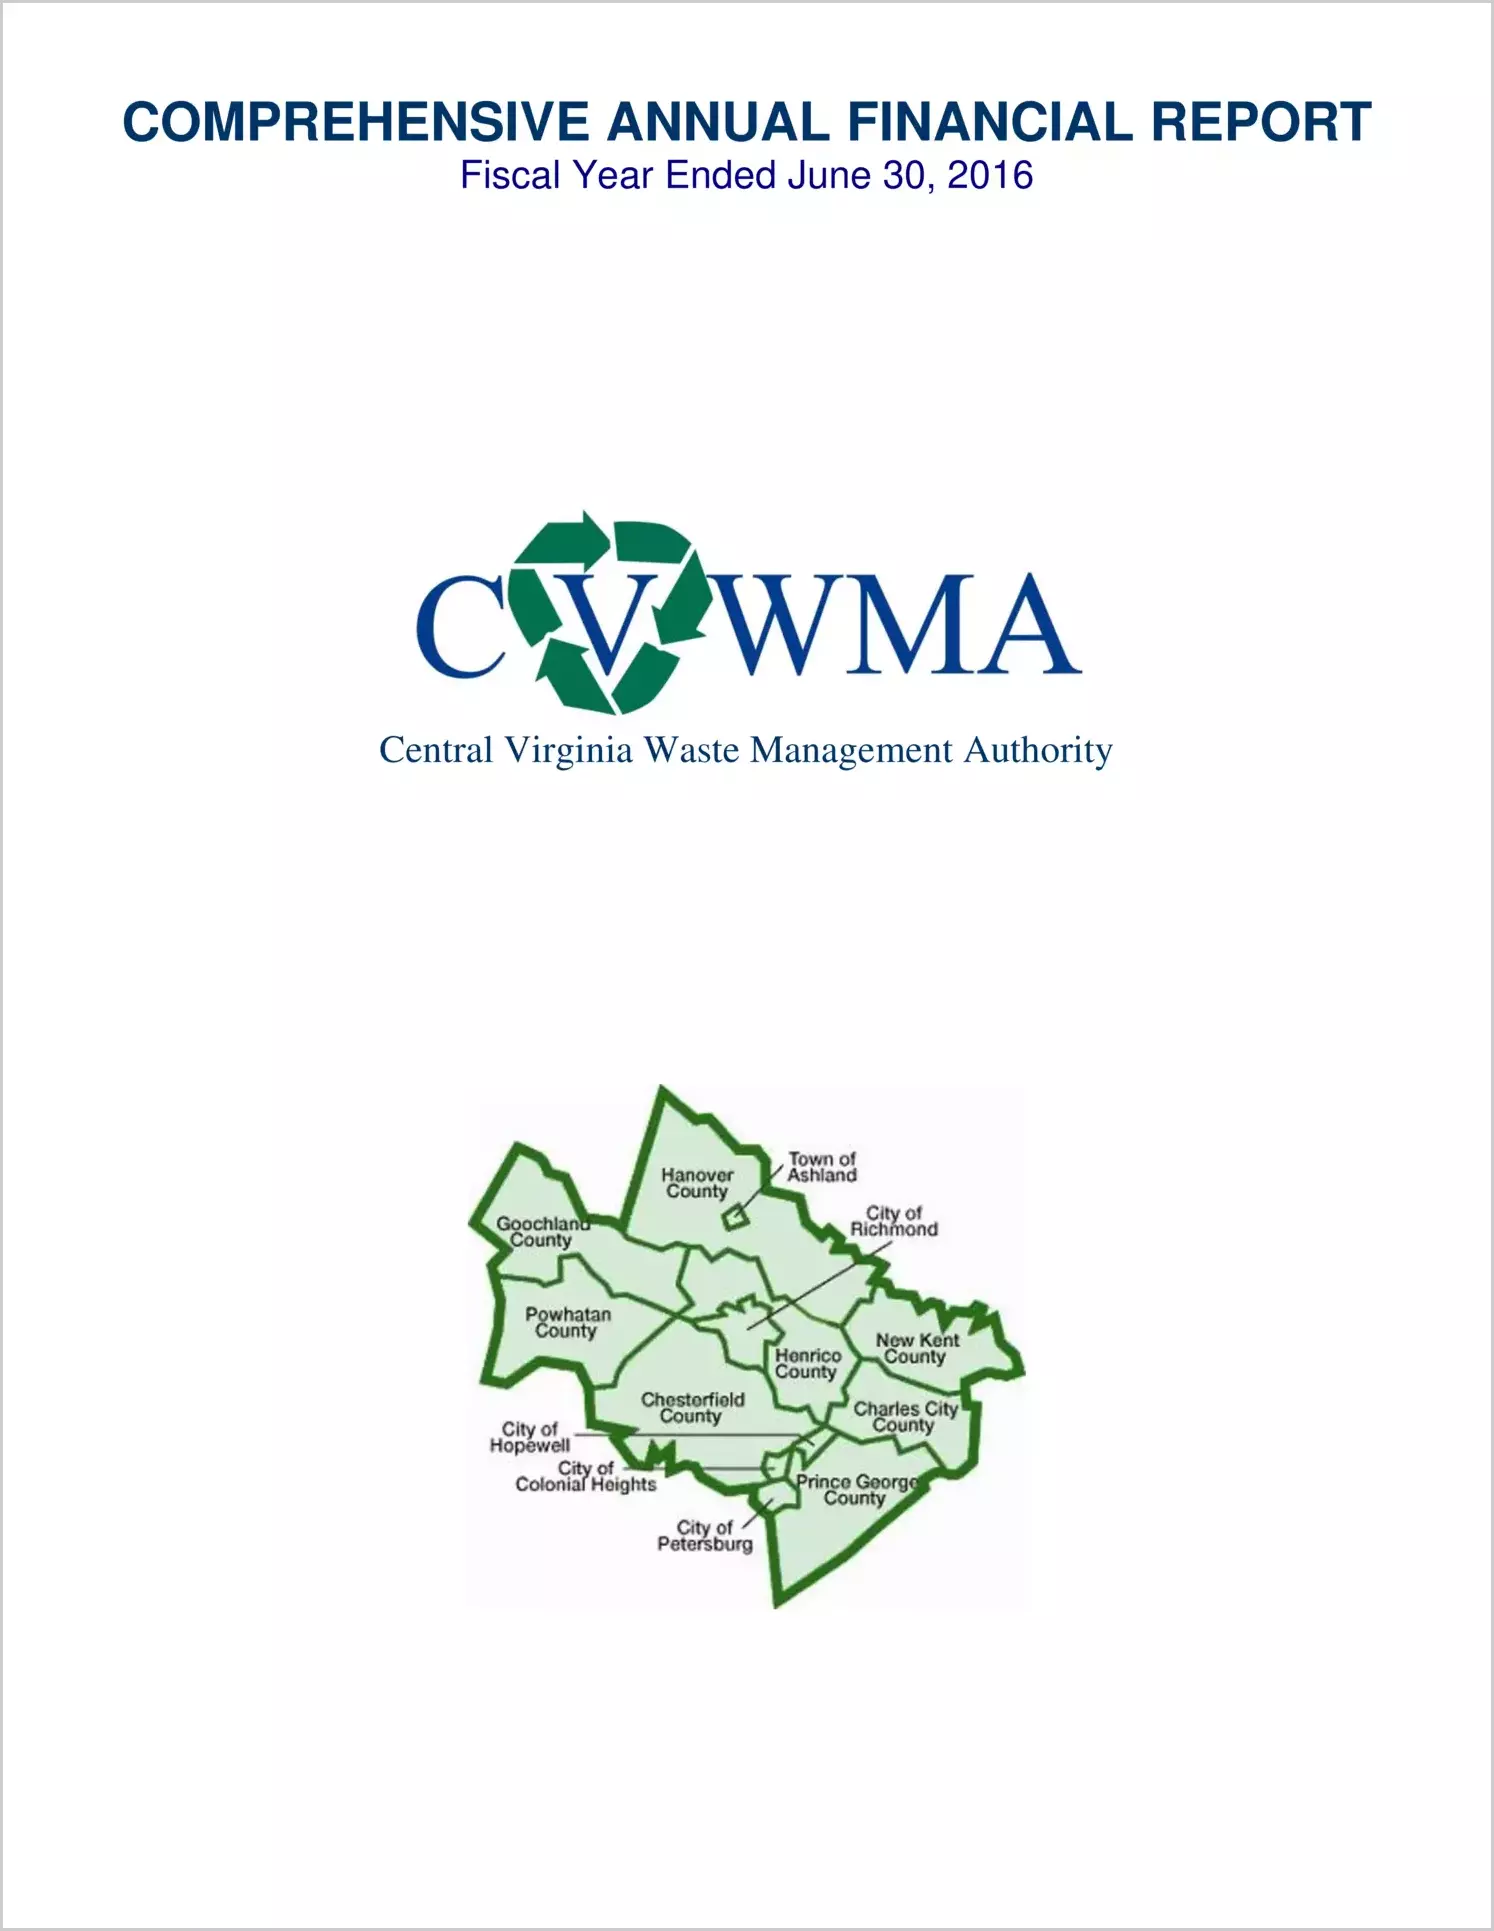 2016 ABC/Other Annual Financial Report  for Central Virginia Waste Management Authority